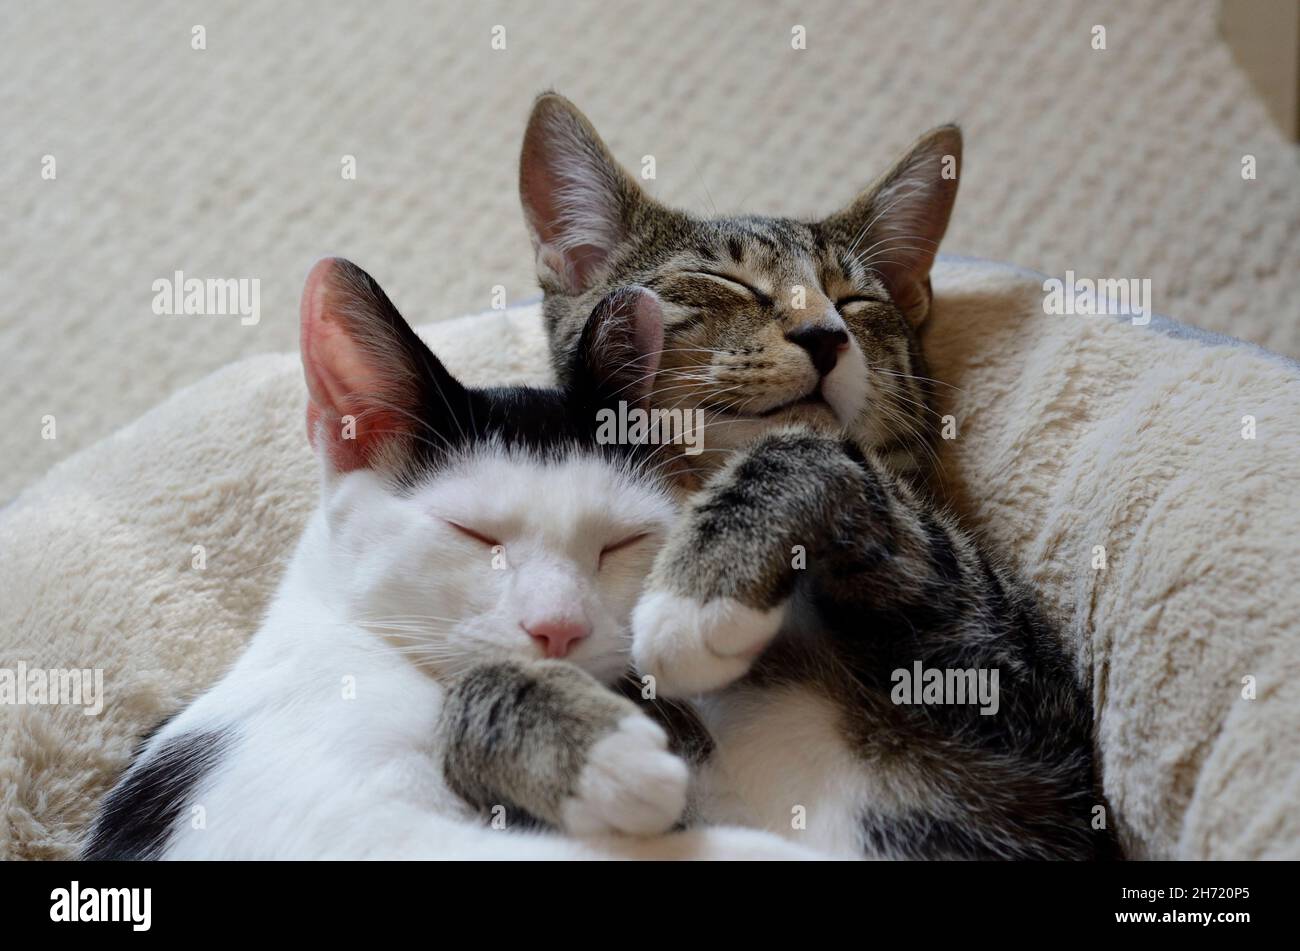 Sleeping kittens smiling in bed Stock Photo